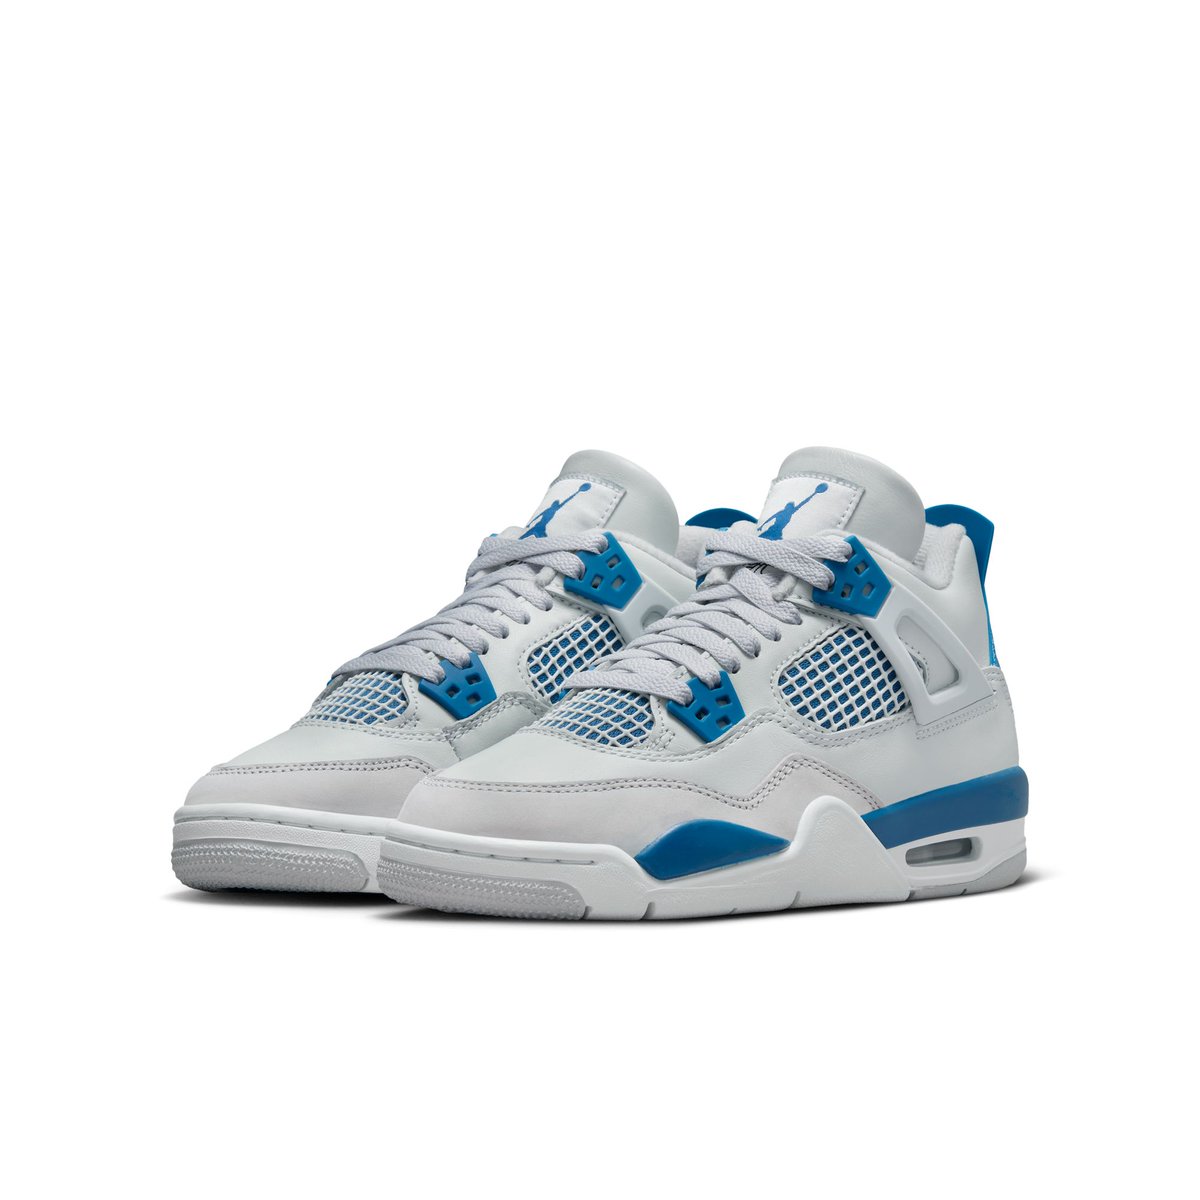 Some sizes of the Jordan 4 Military Blue are available on our online store. Men's - soleplayatl.com/products/mens-… Women's - soleplayatl.com/products/big-k…